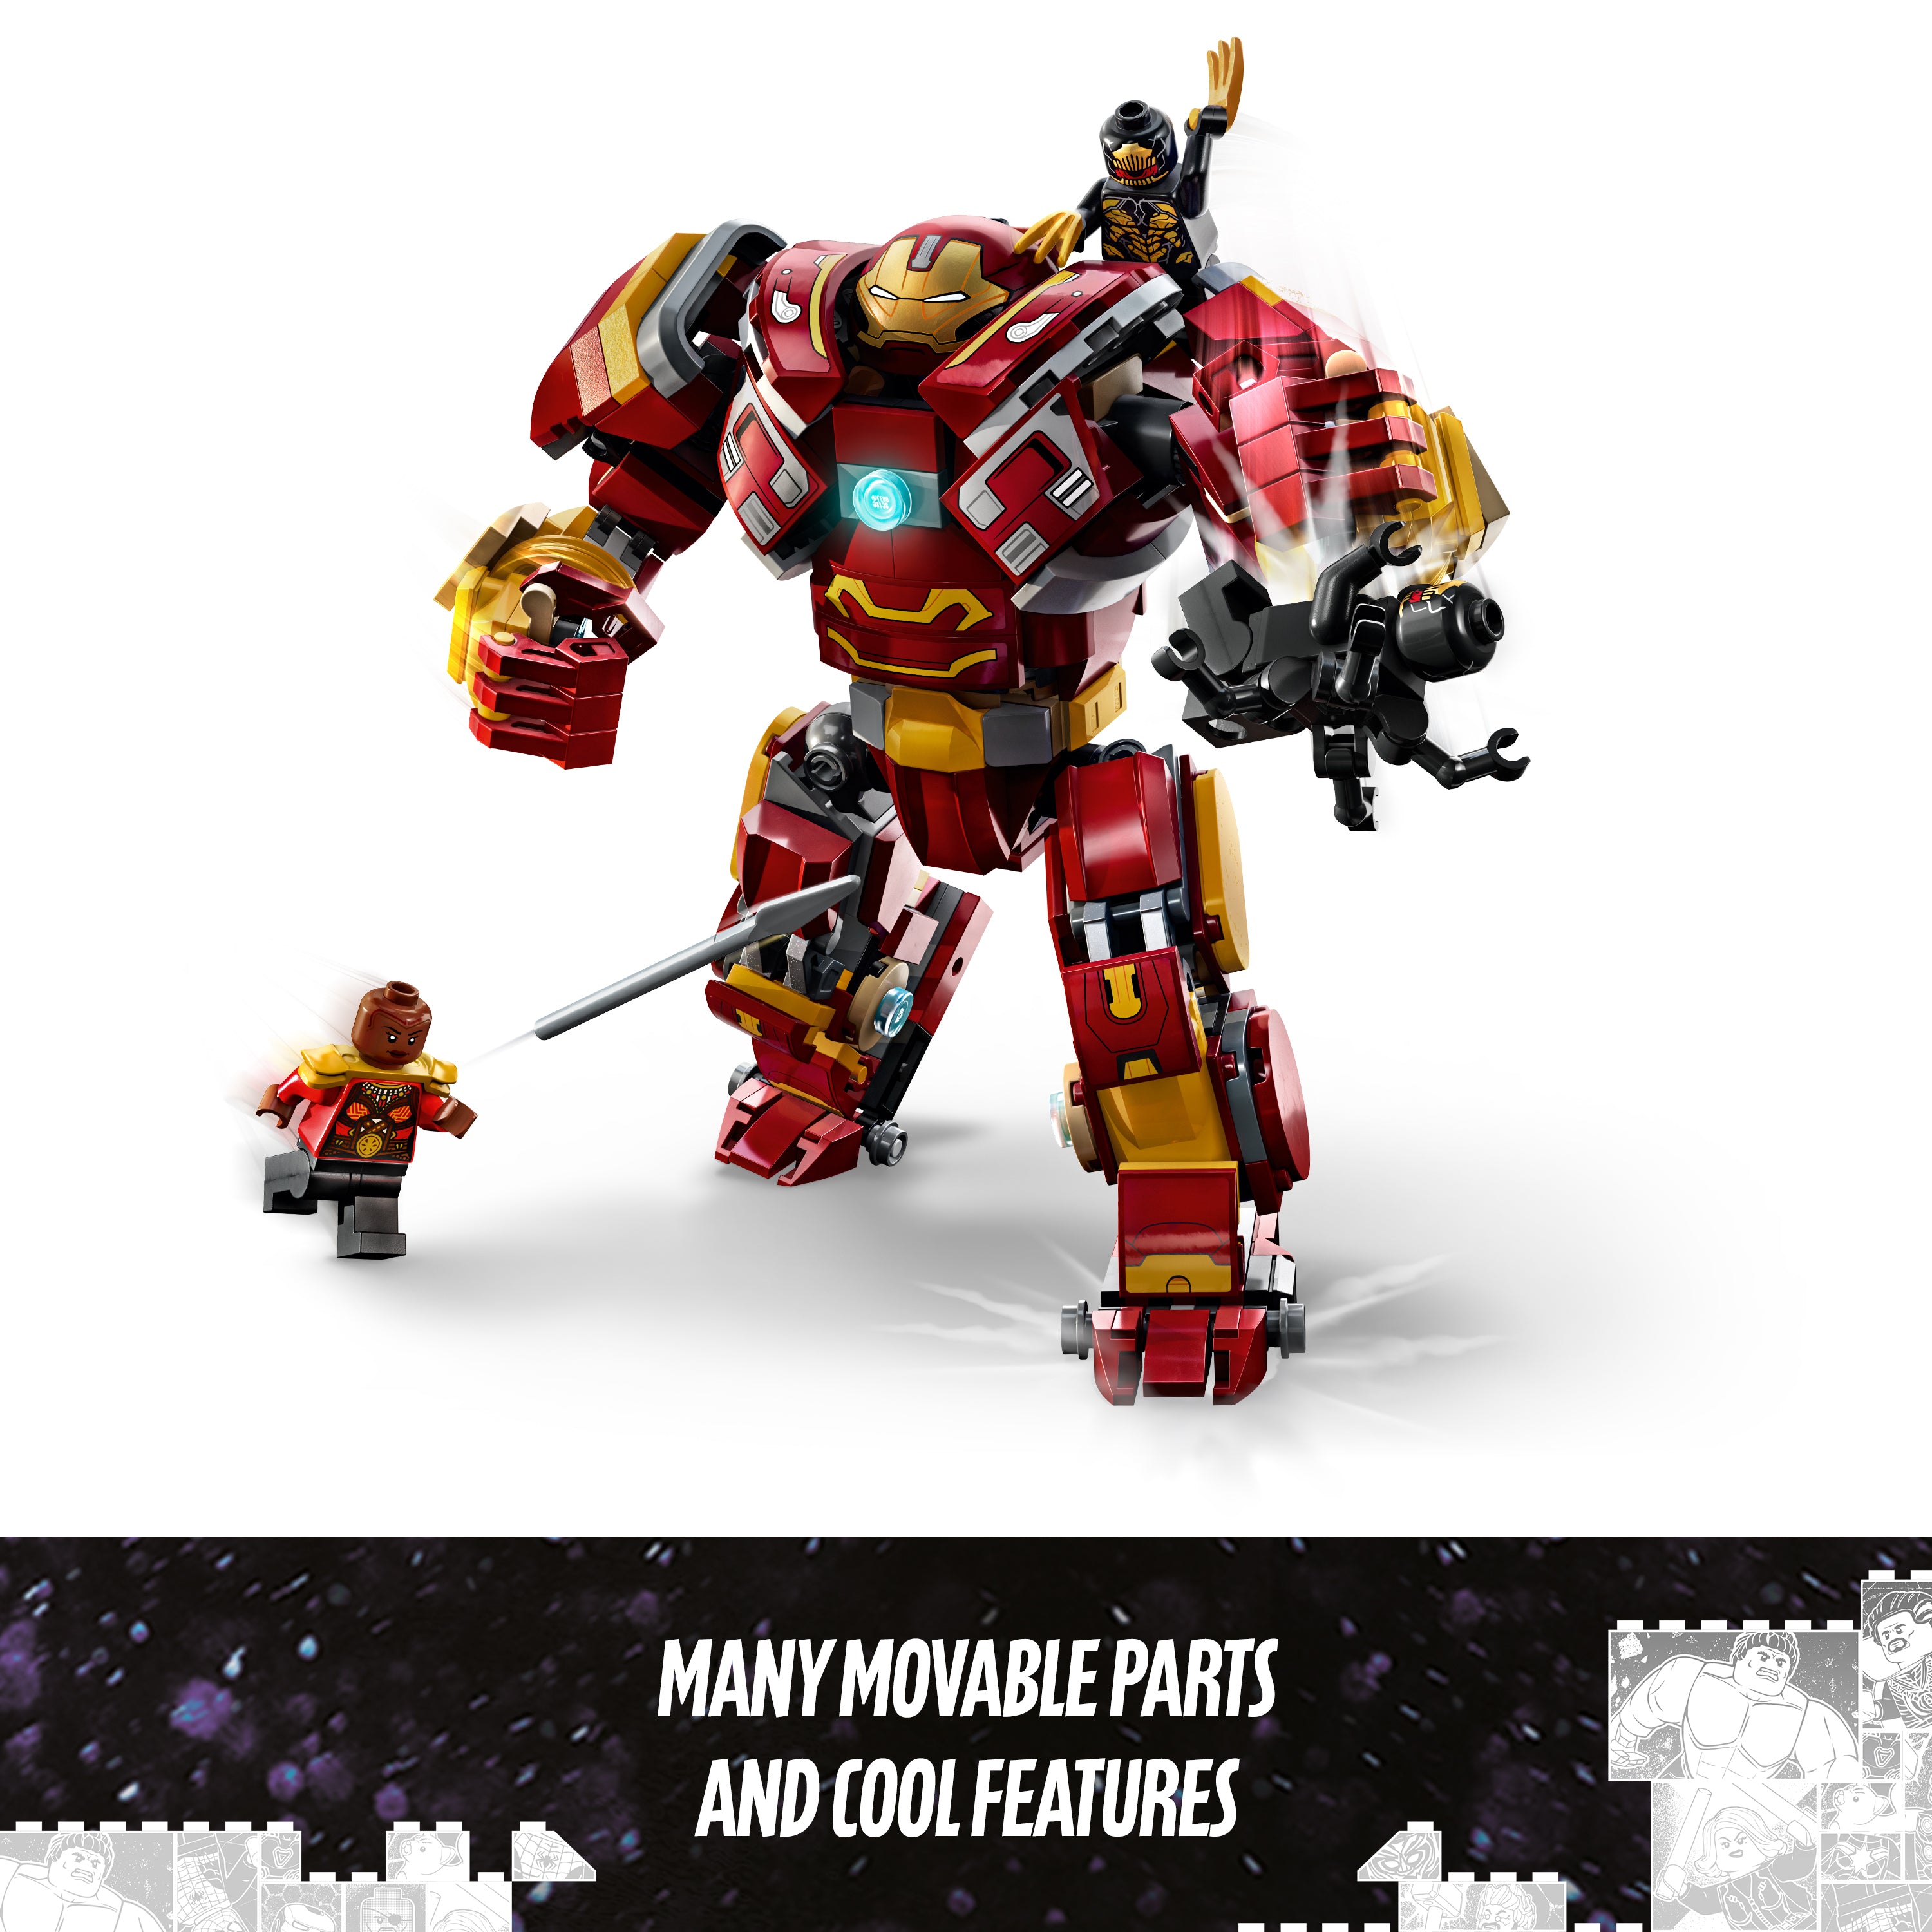 Lego 76247 The Hulkbuster The Battle